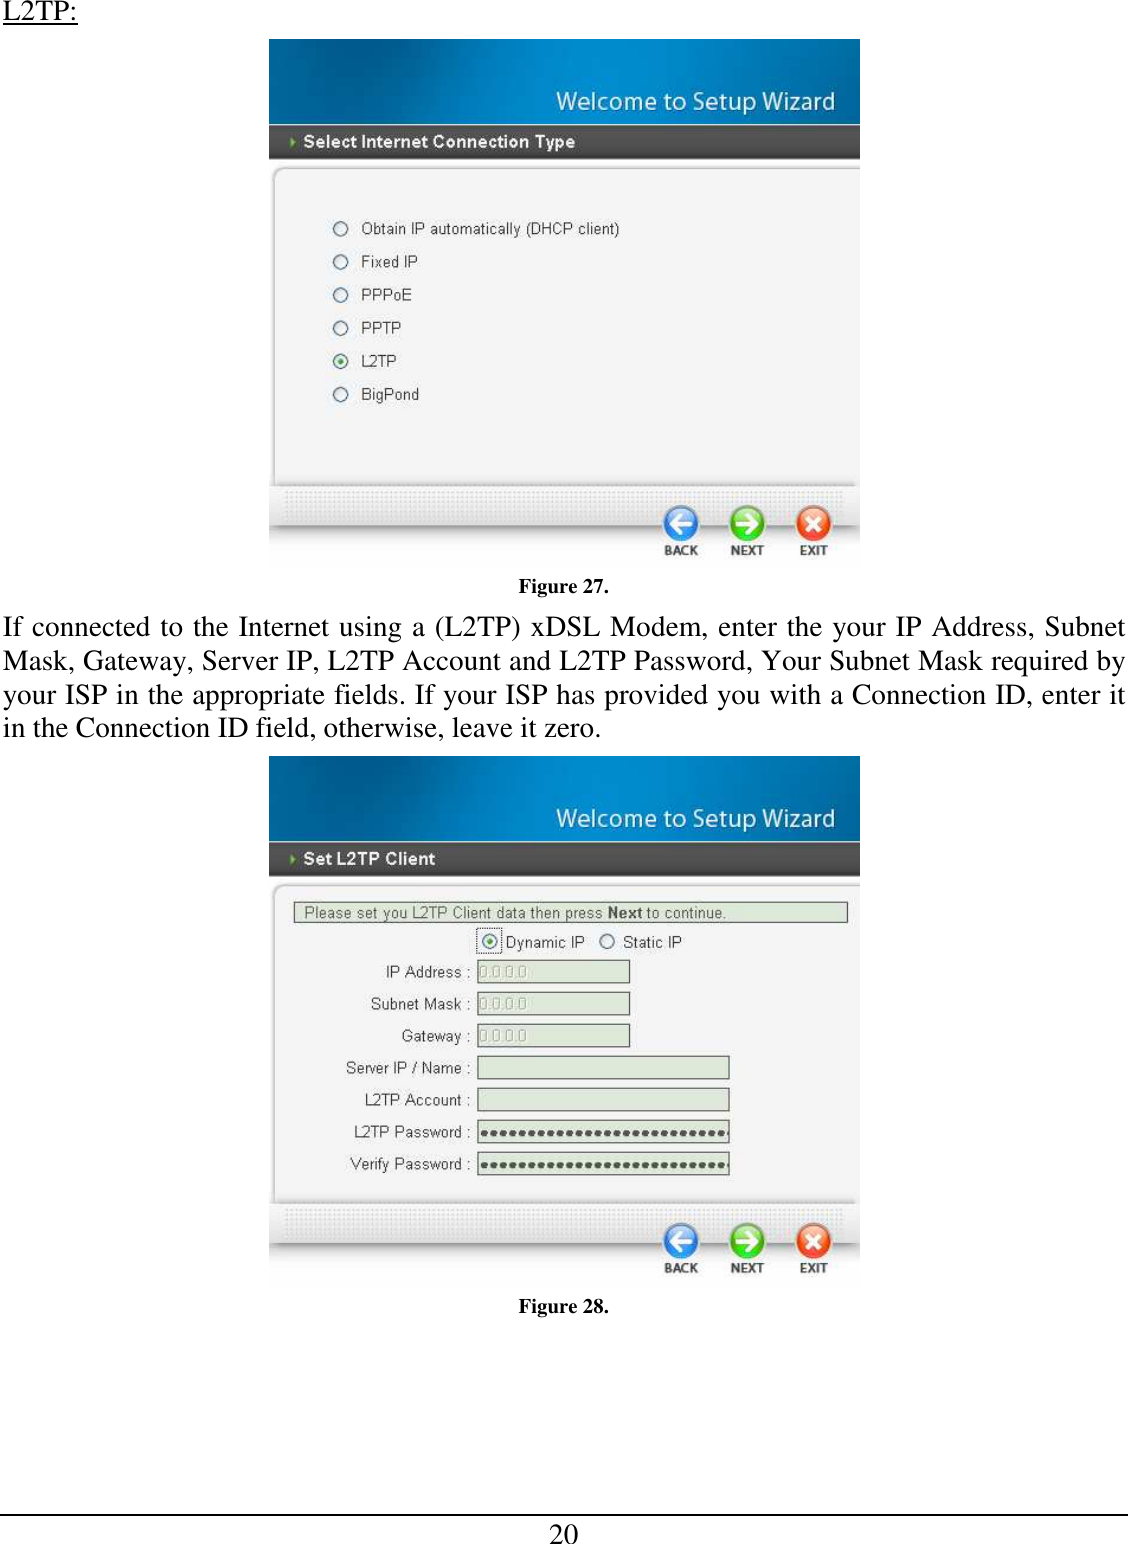 20 L2TP:  Figure 27. If connected to the Internet using a (L2TP) xDSL Modem, enter the your IP Address, Subnet Mask, Gateway, Server IP, L2TP Account and L2TP Password, Your Subnet Mask required by your ISP in the appropriate fields. If your ISP has provided you with a Connection ID, enter it in the Connection ID field, otherwise, leave it zero.  Figure 28. 